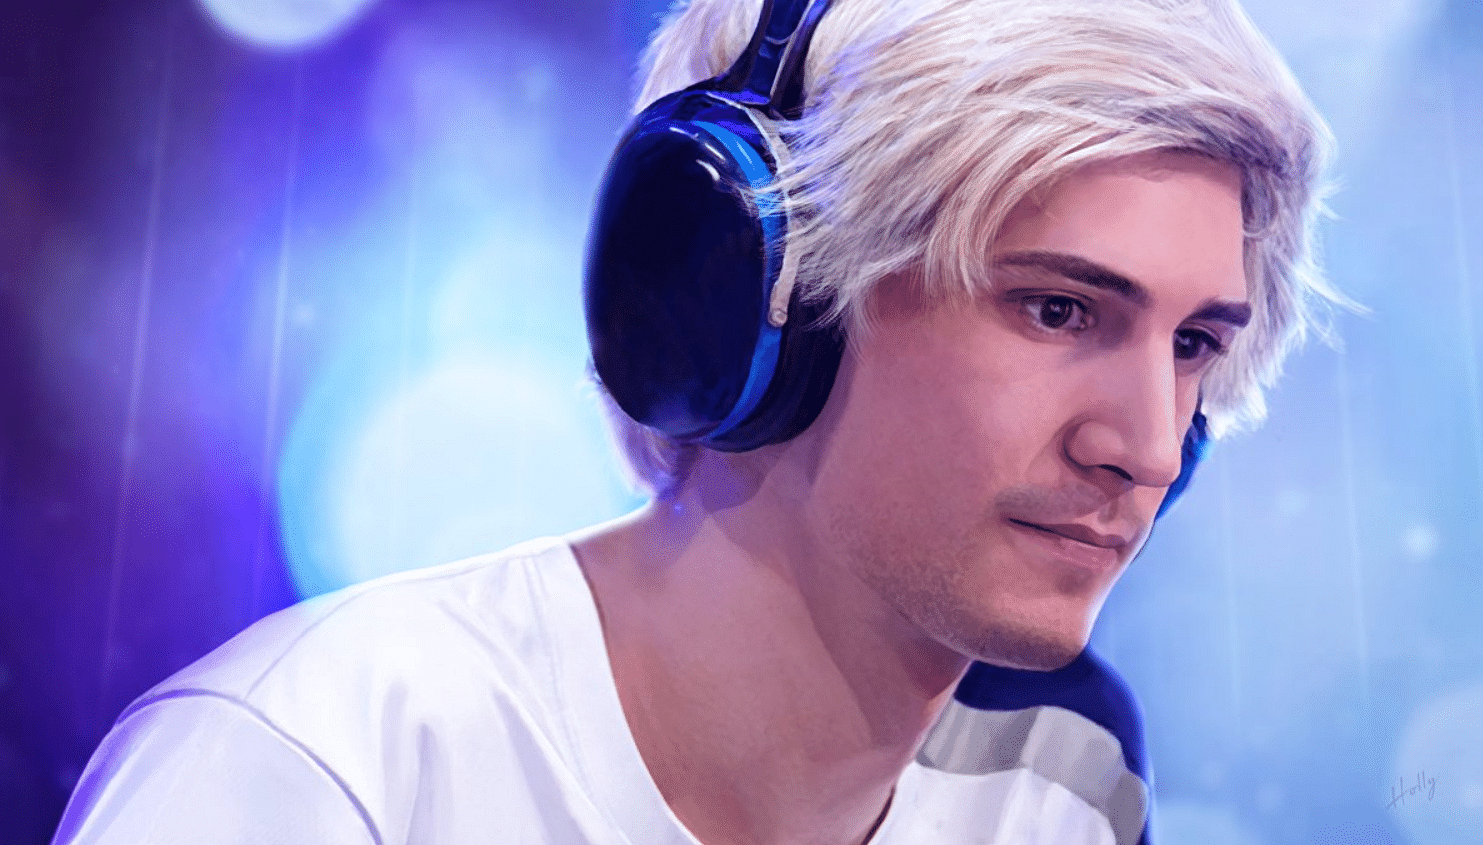 xQc Twitch's most watched streamer